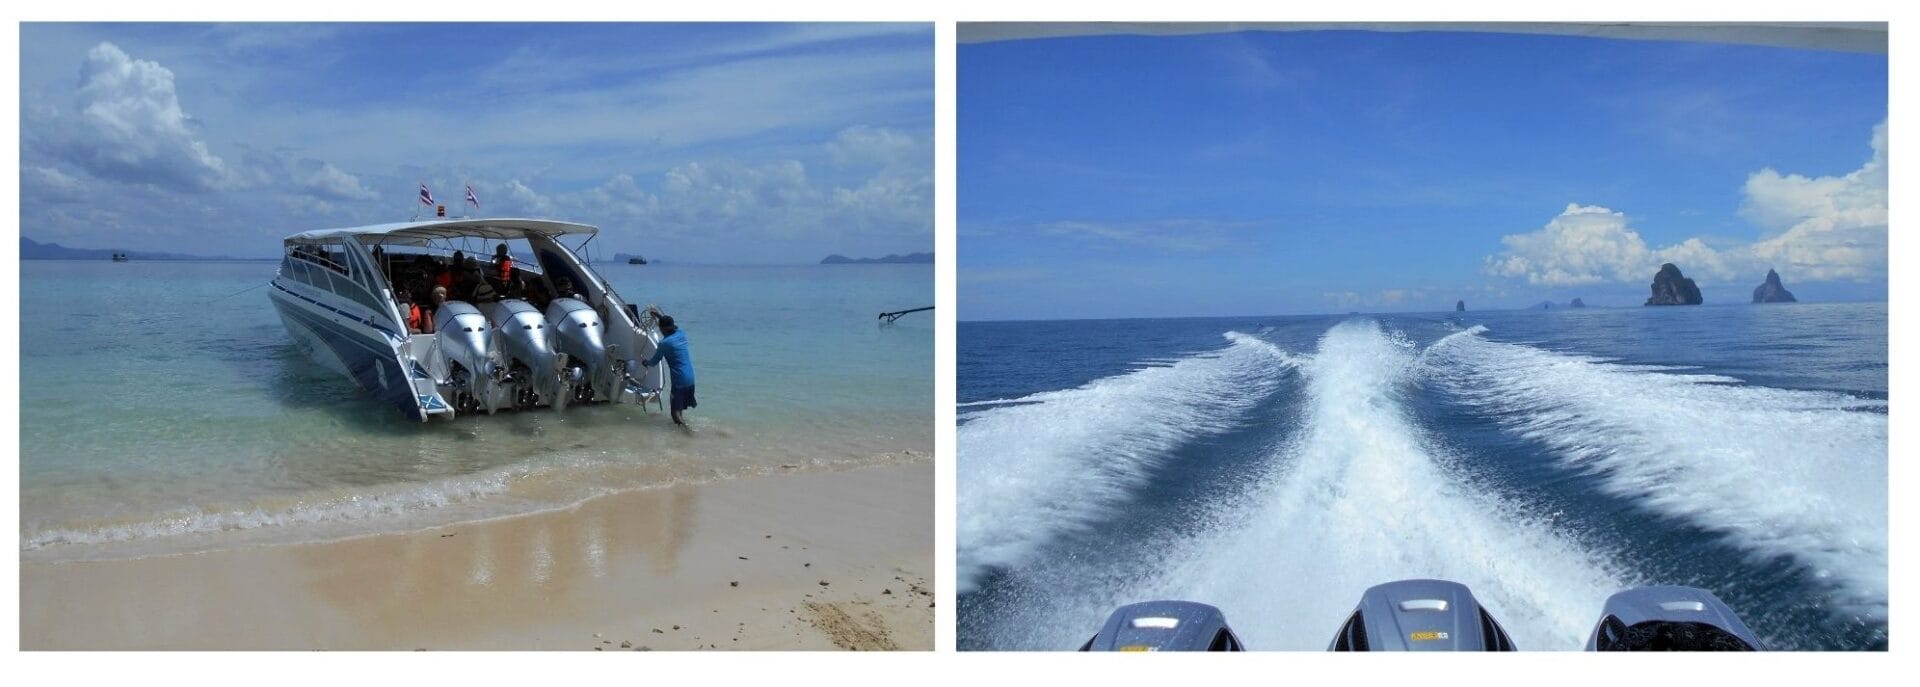 we left koh bulon by speedboat for koh lipe. The backpacking housewife